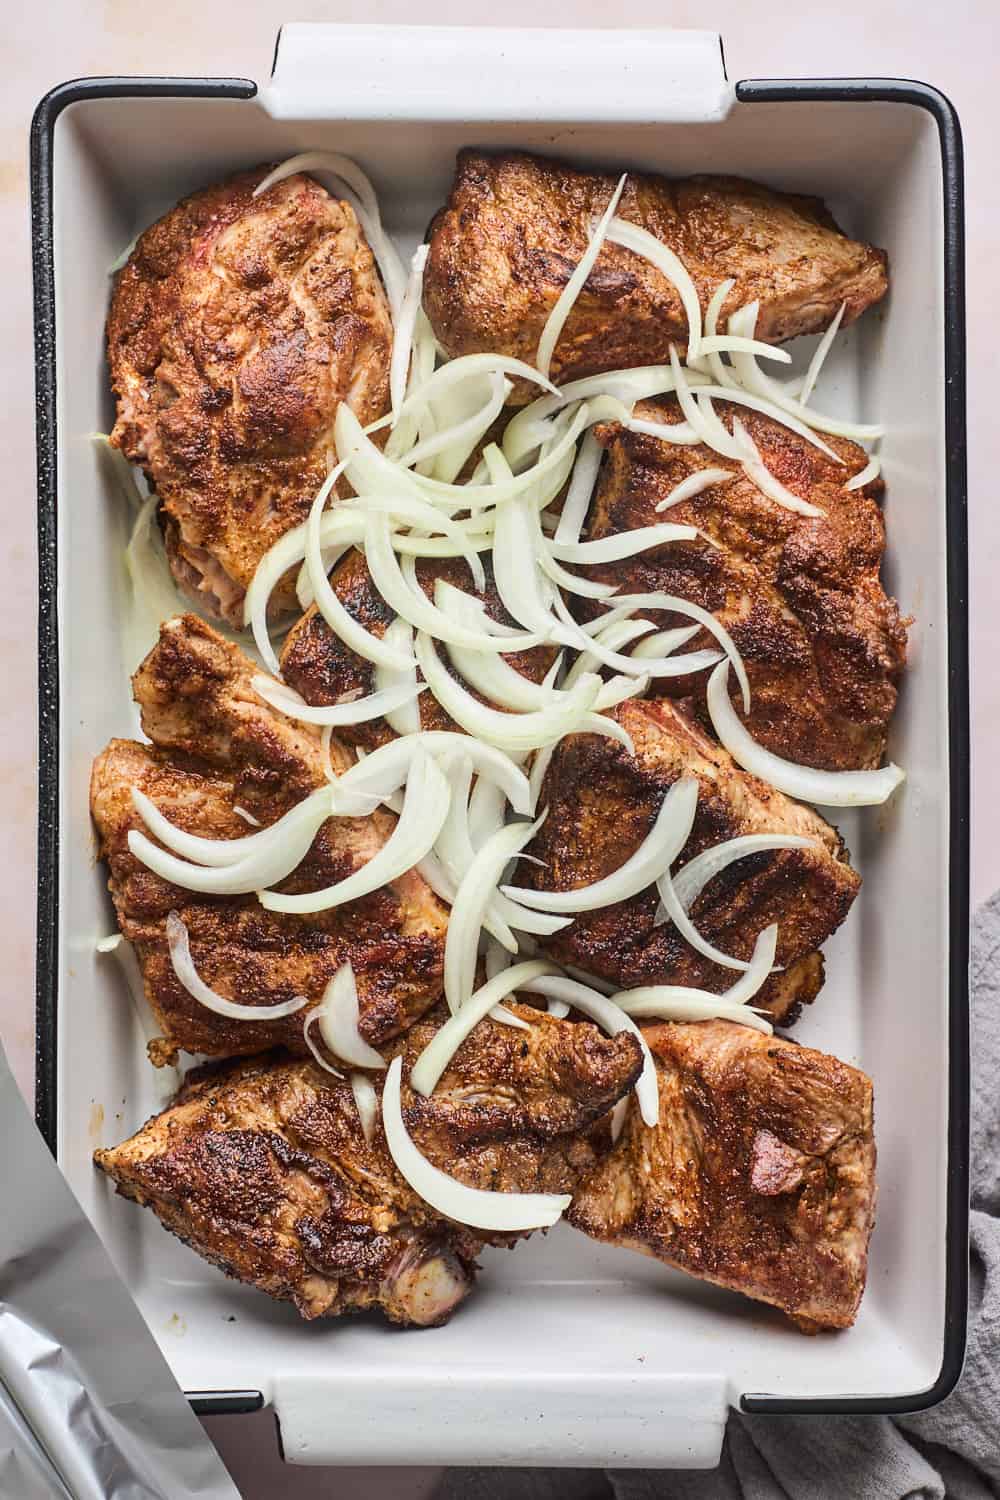 Sliced onions over browned pork neck bones in a baking dish.